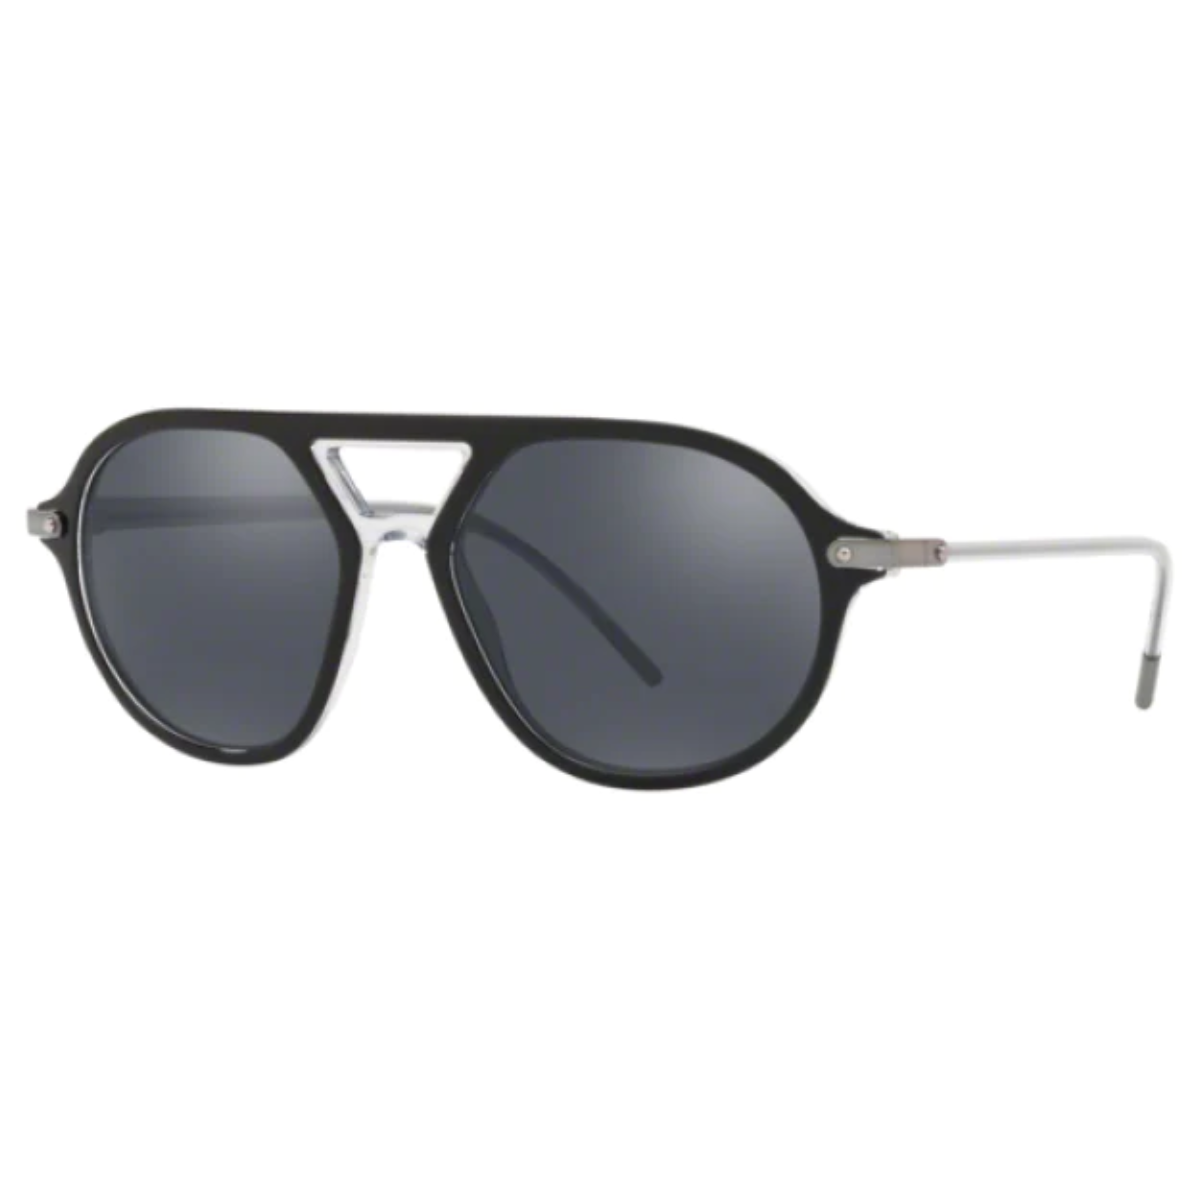 "Upgrade your accessory game with Dolce & Gabbana DG4343 675 6G sunglasses, designed for both men and women."